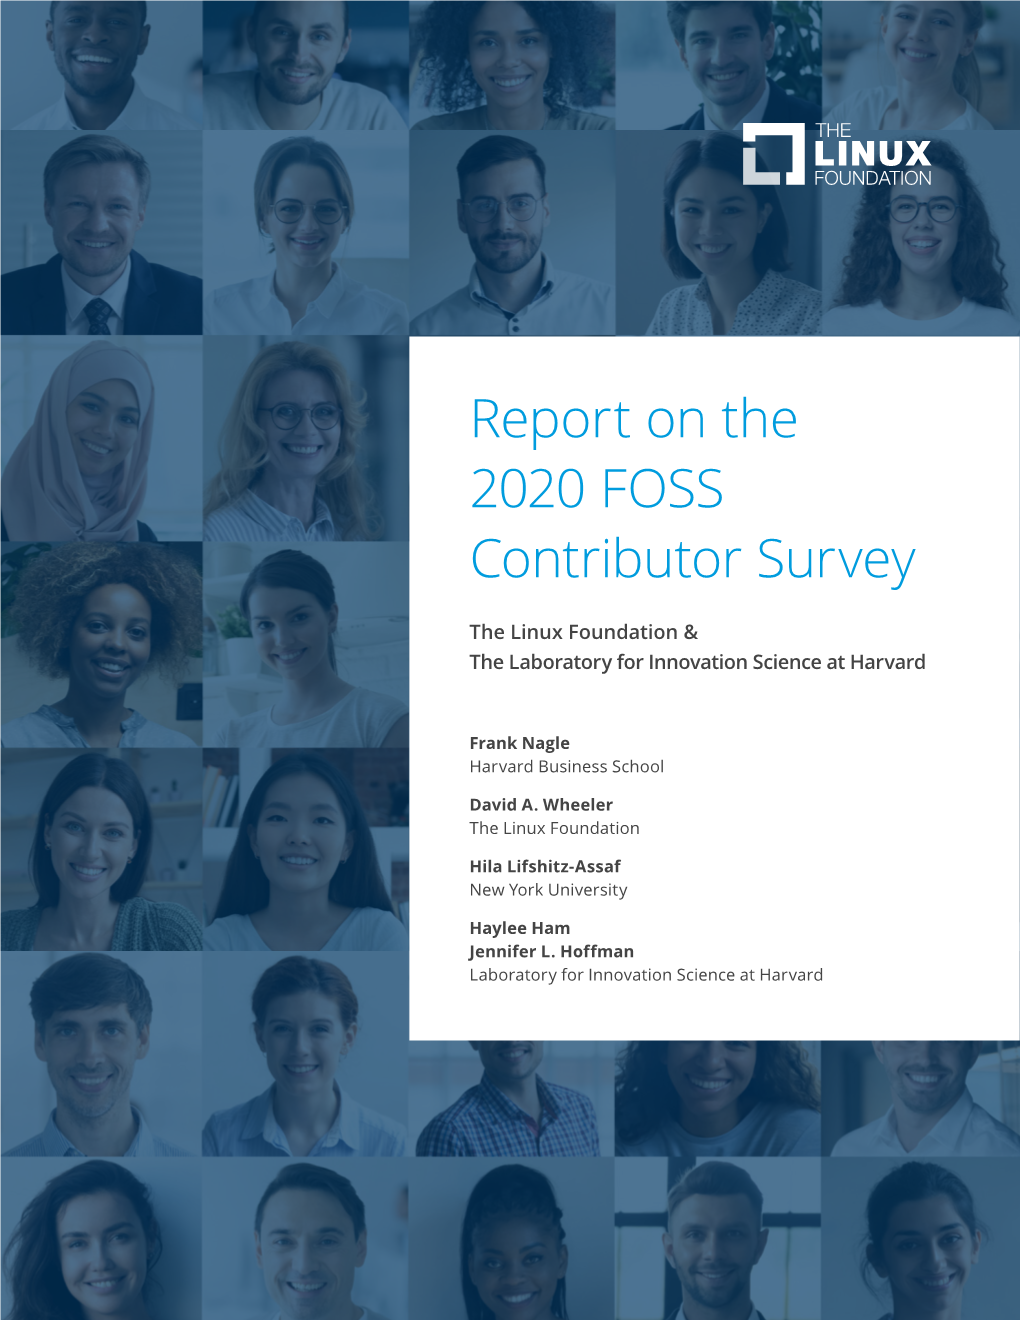 Report on the 2020 FOSS Contributor Survey